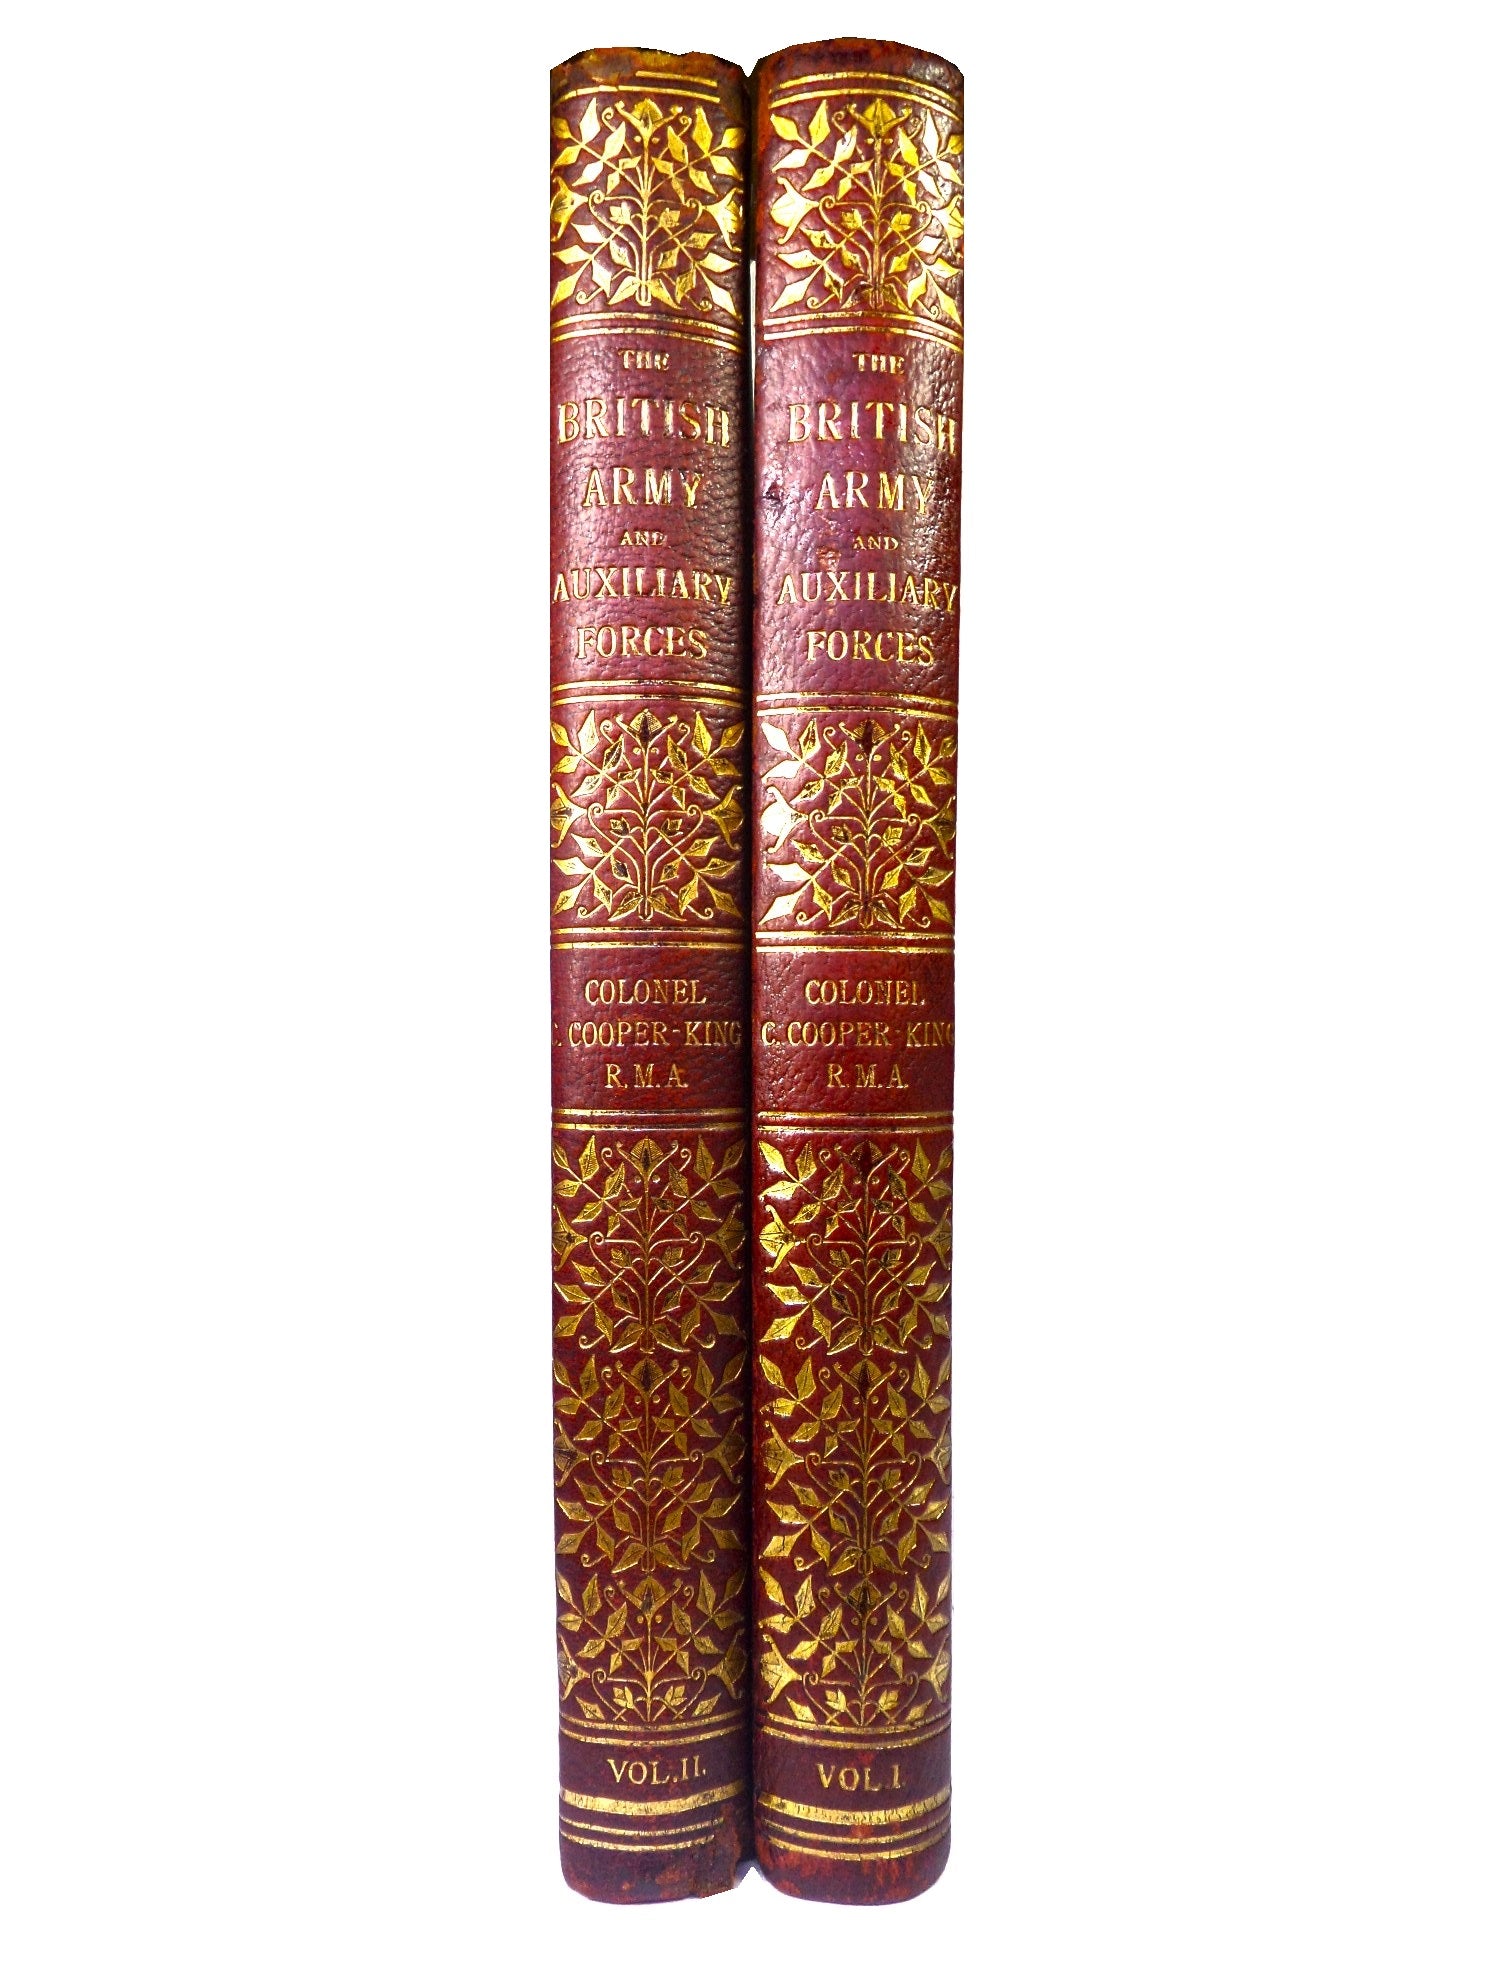 THE BRITISH ARMY & AUXILIARY FORCES BY C. COOPER-KING 1893 SOTHERAN FINE BINDING